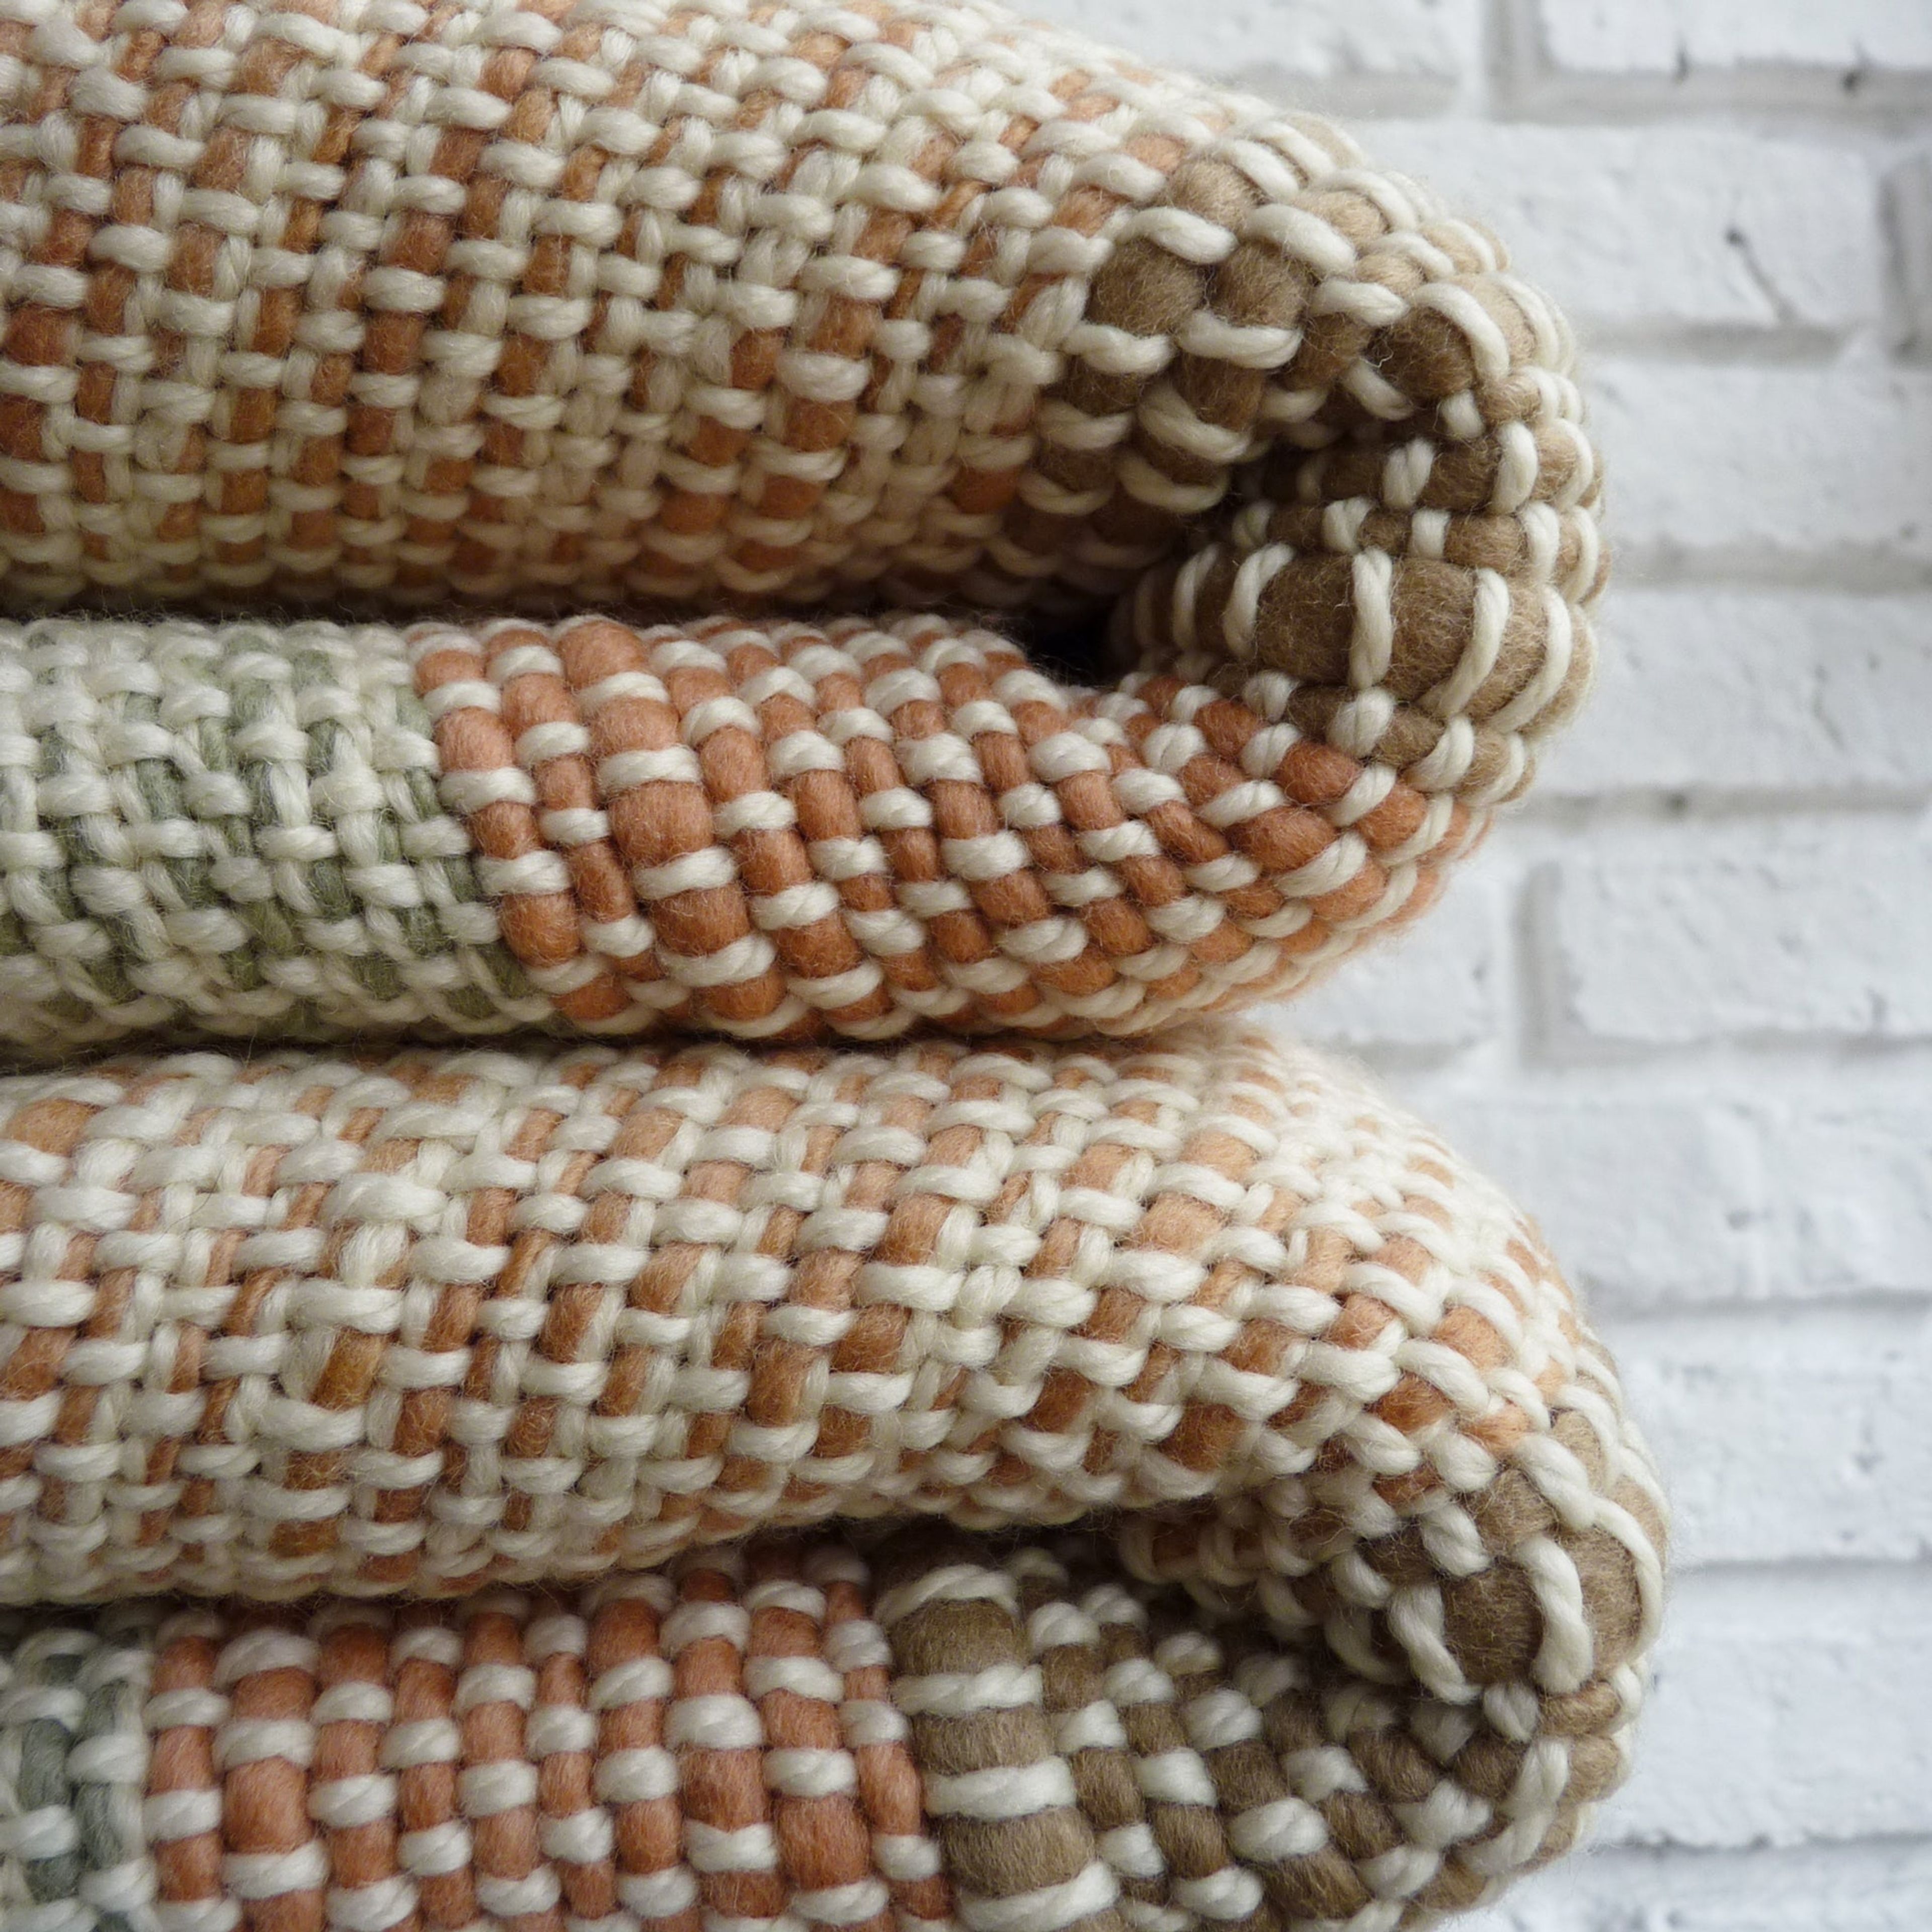 Handwoven Merino Wool Throw - Add a Touch of Artisanal Elegance to Your Home Decor - Sustainable and Eco-Friendly Blanket